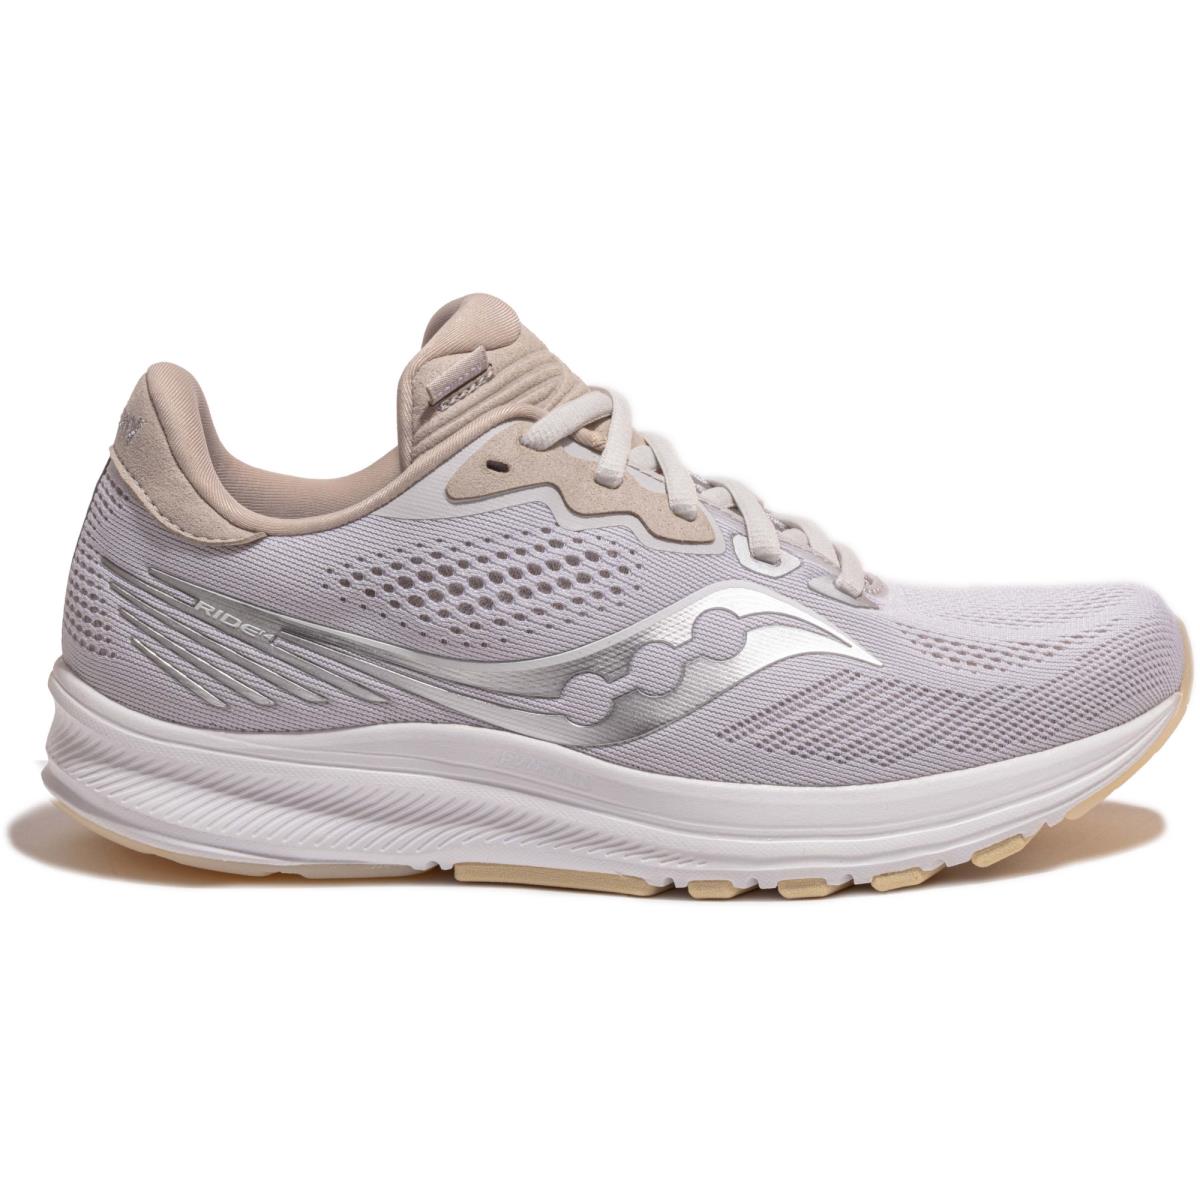 Saucony Women Ride 14 Shoes New Natural